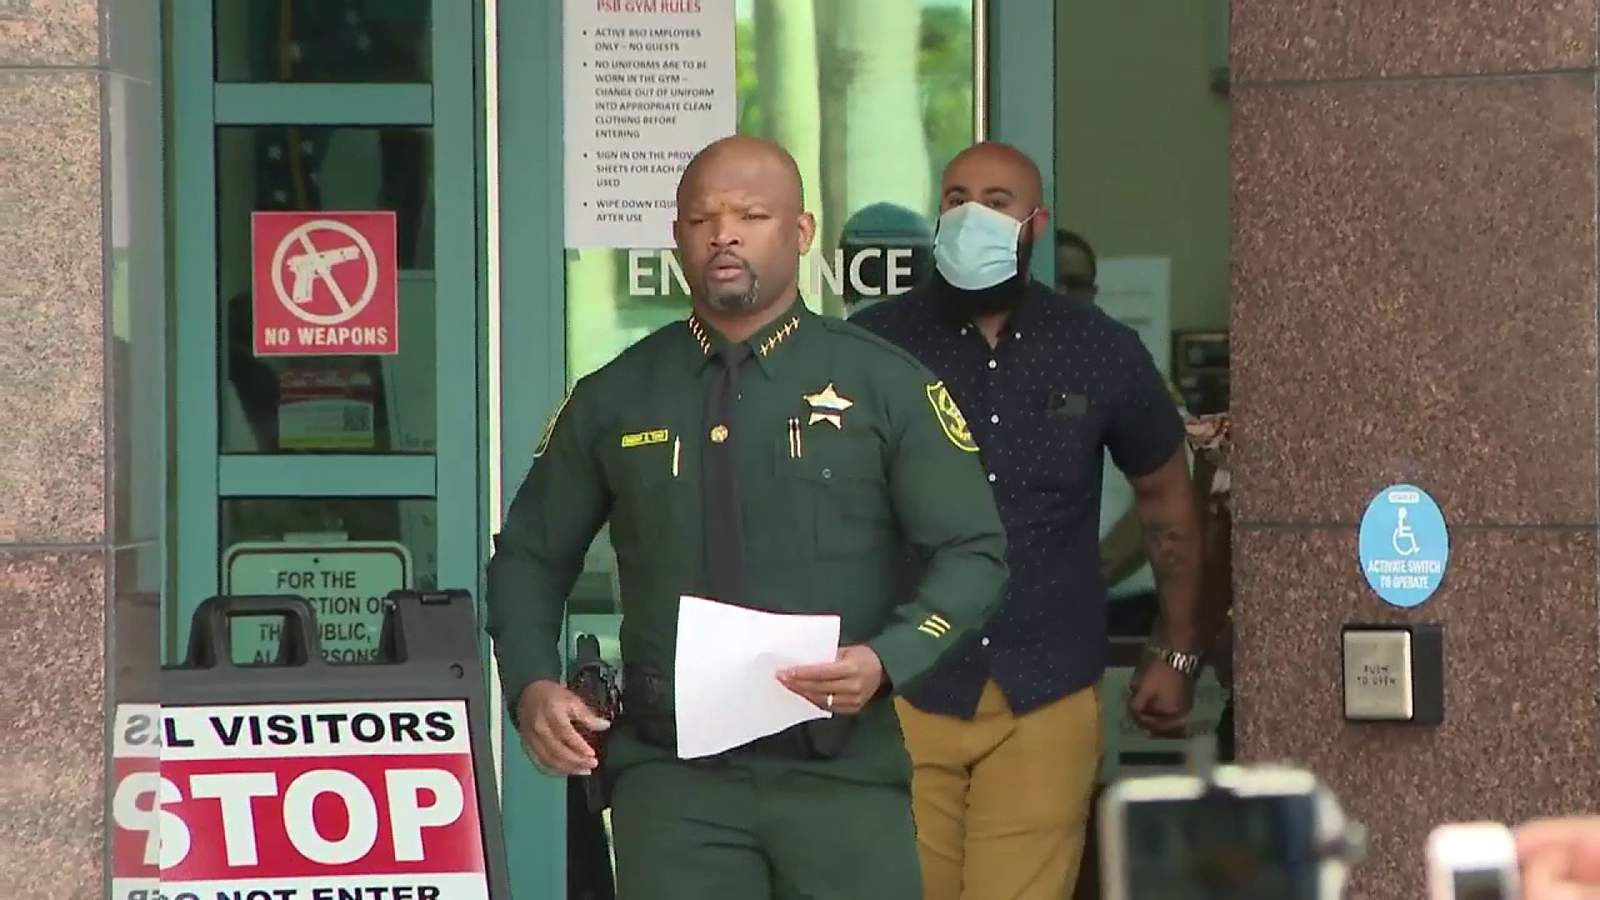 BSO deputies union will hold no-confidence vote on Sheriff Gregory Tony